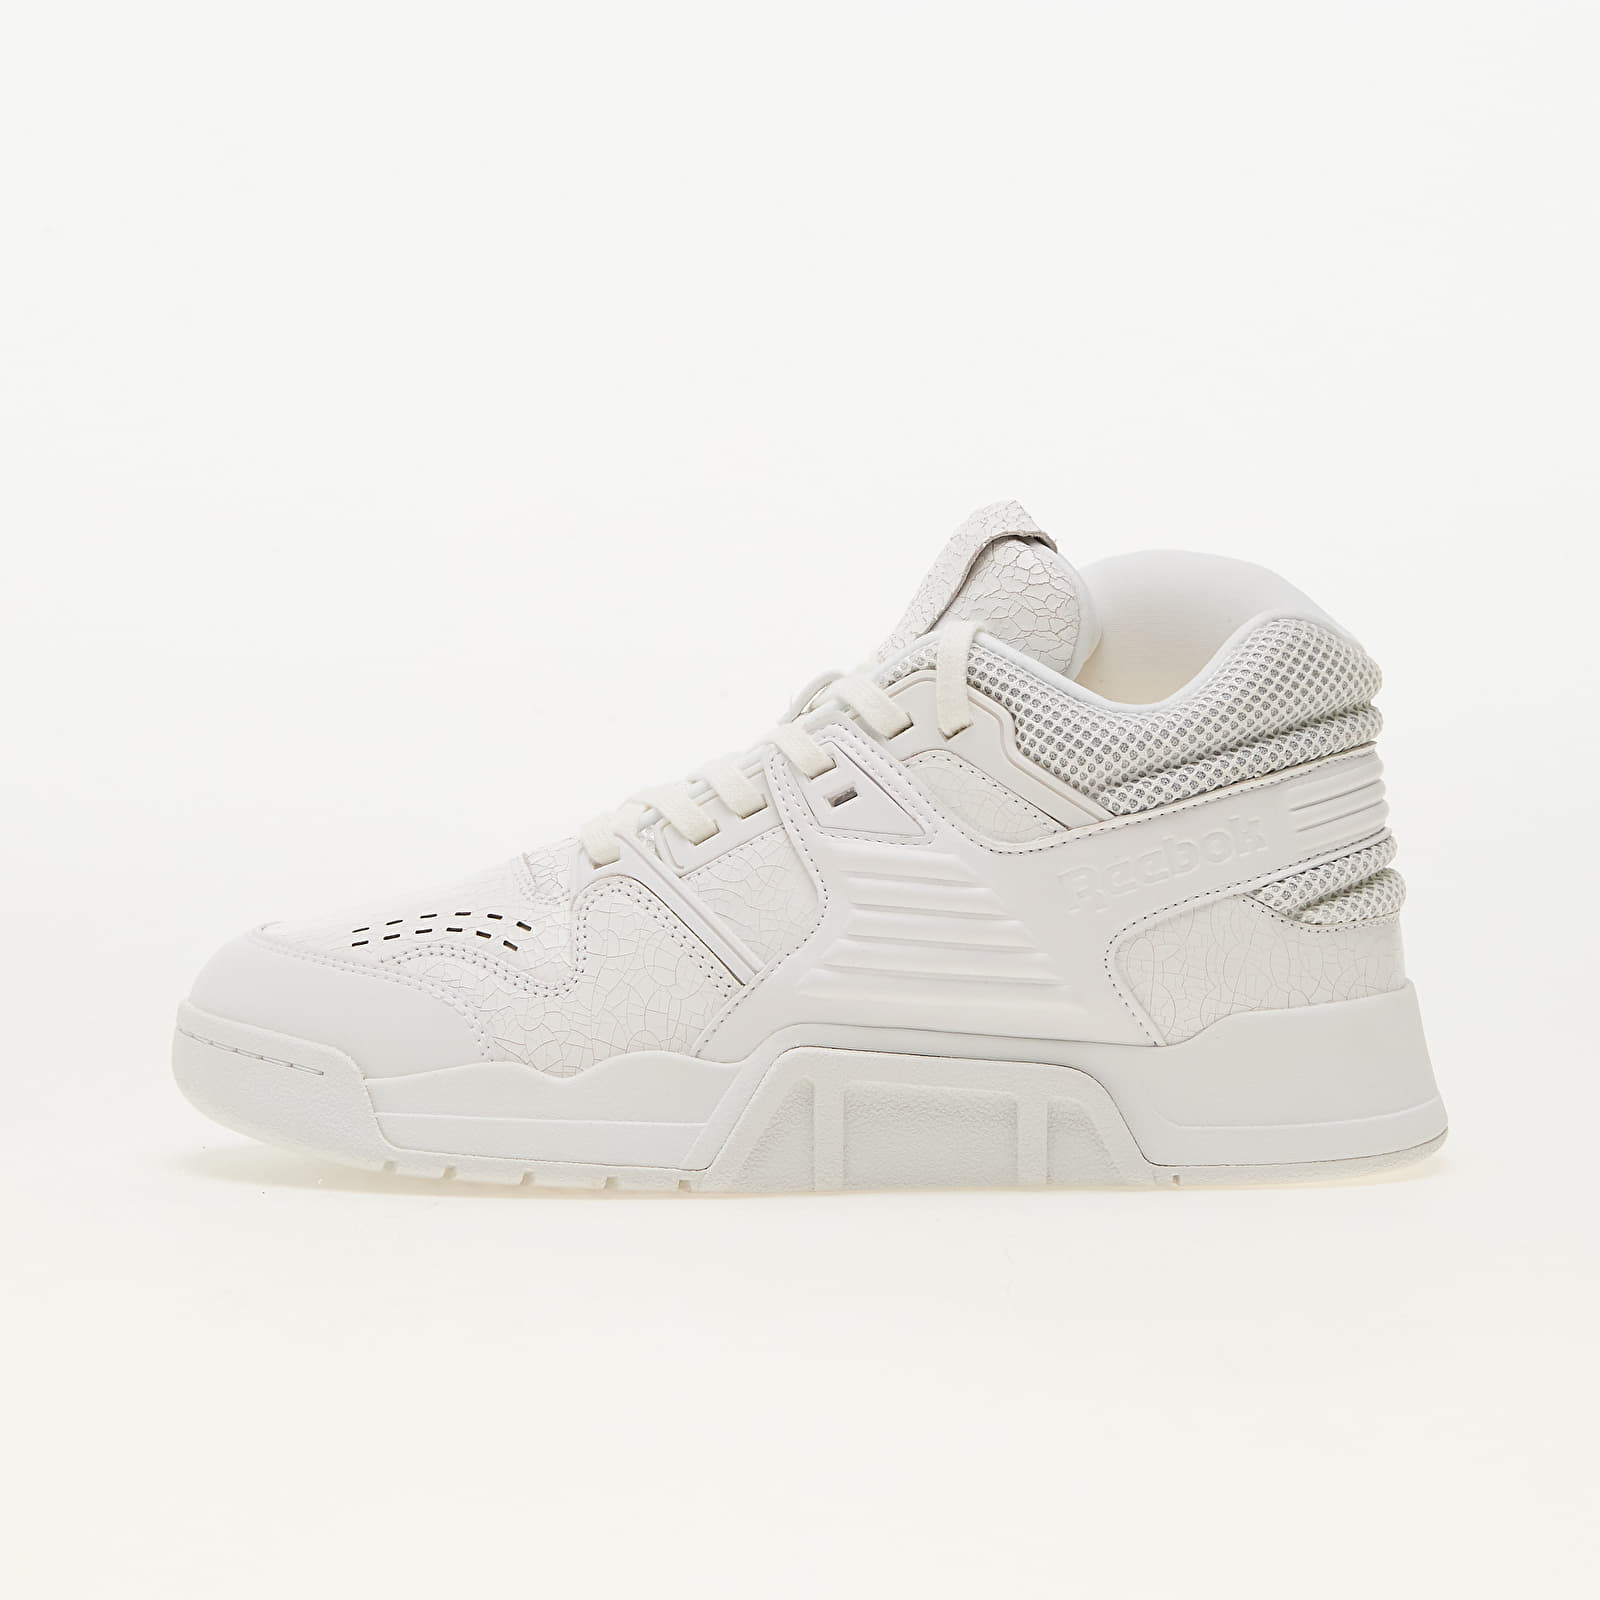 Chaussures et baskets homme Reebok Cxt Cracked White